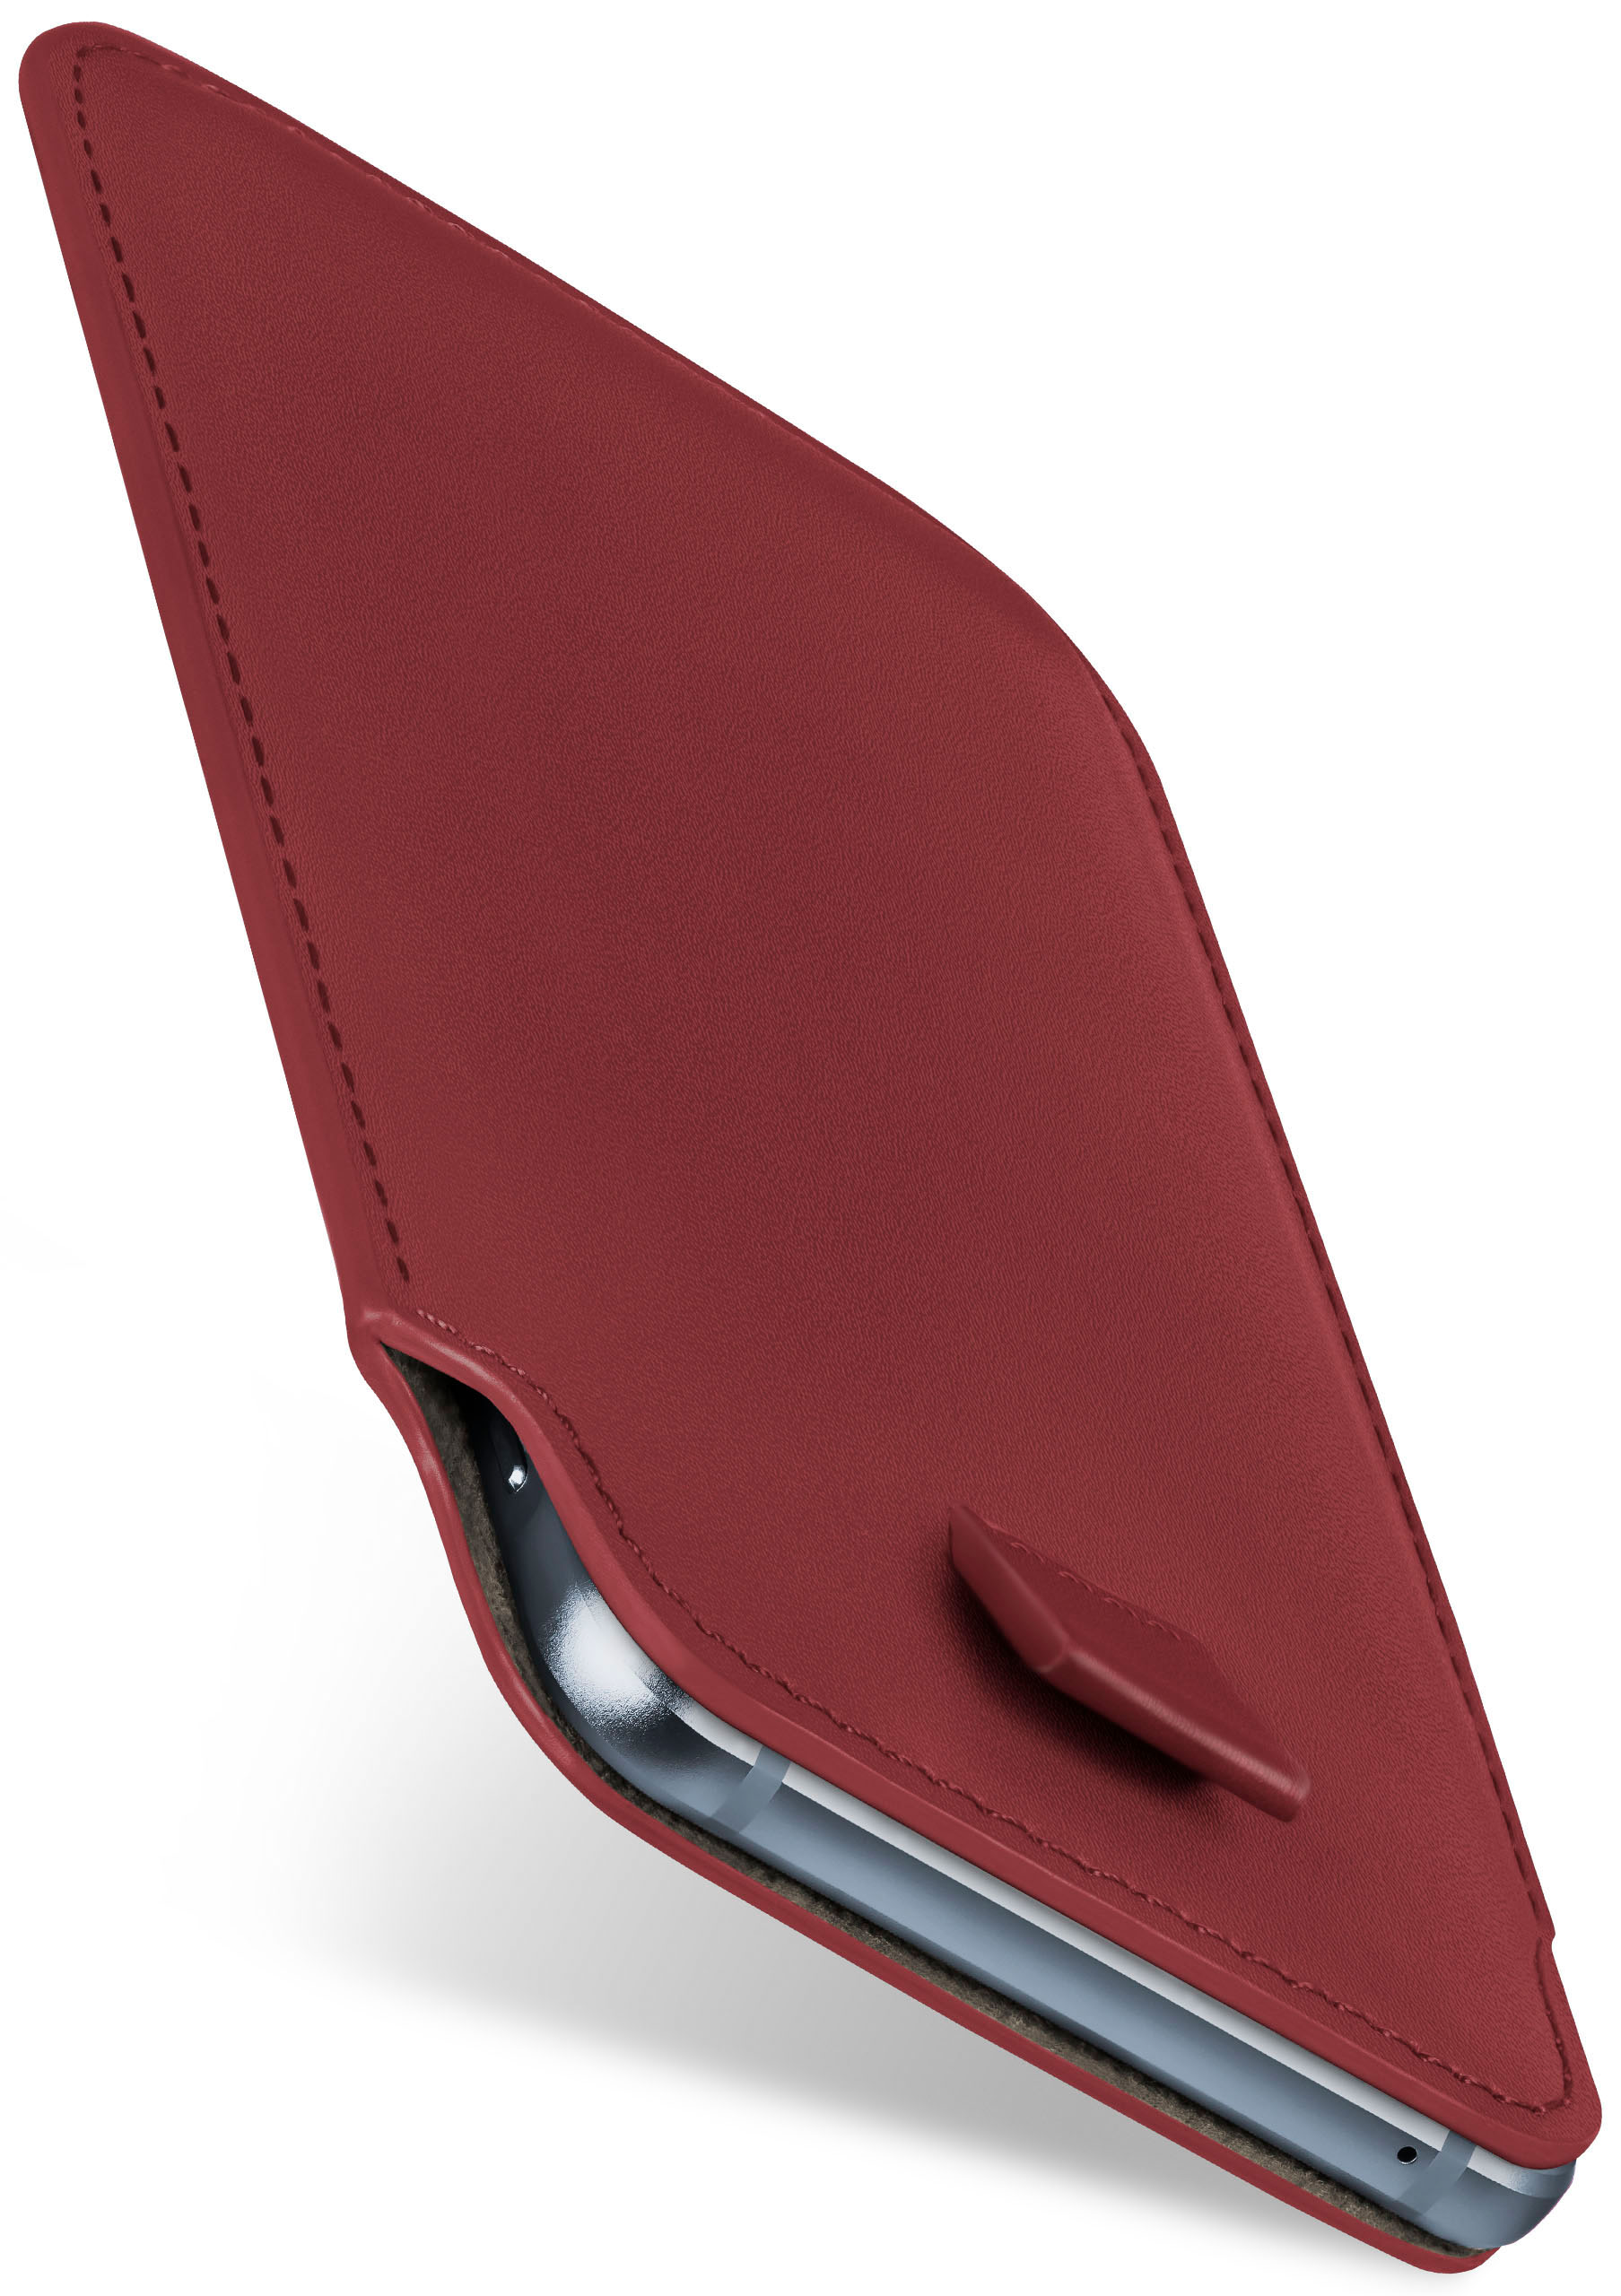 635, Slide Nokia, MOEX Maroon-Red Full Cover, Case, 630 Lumia /